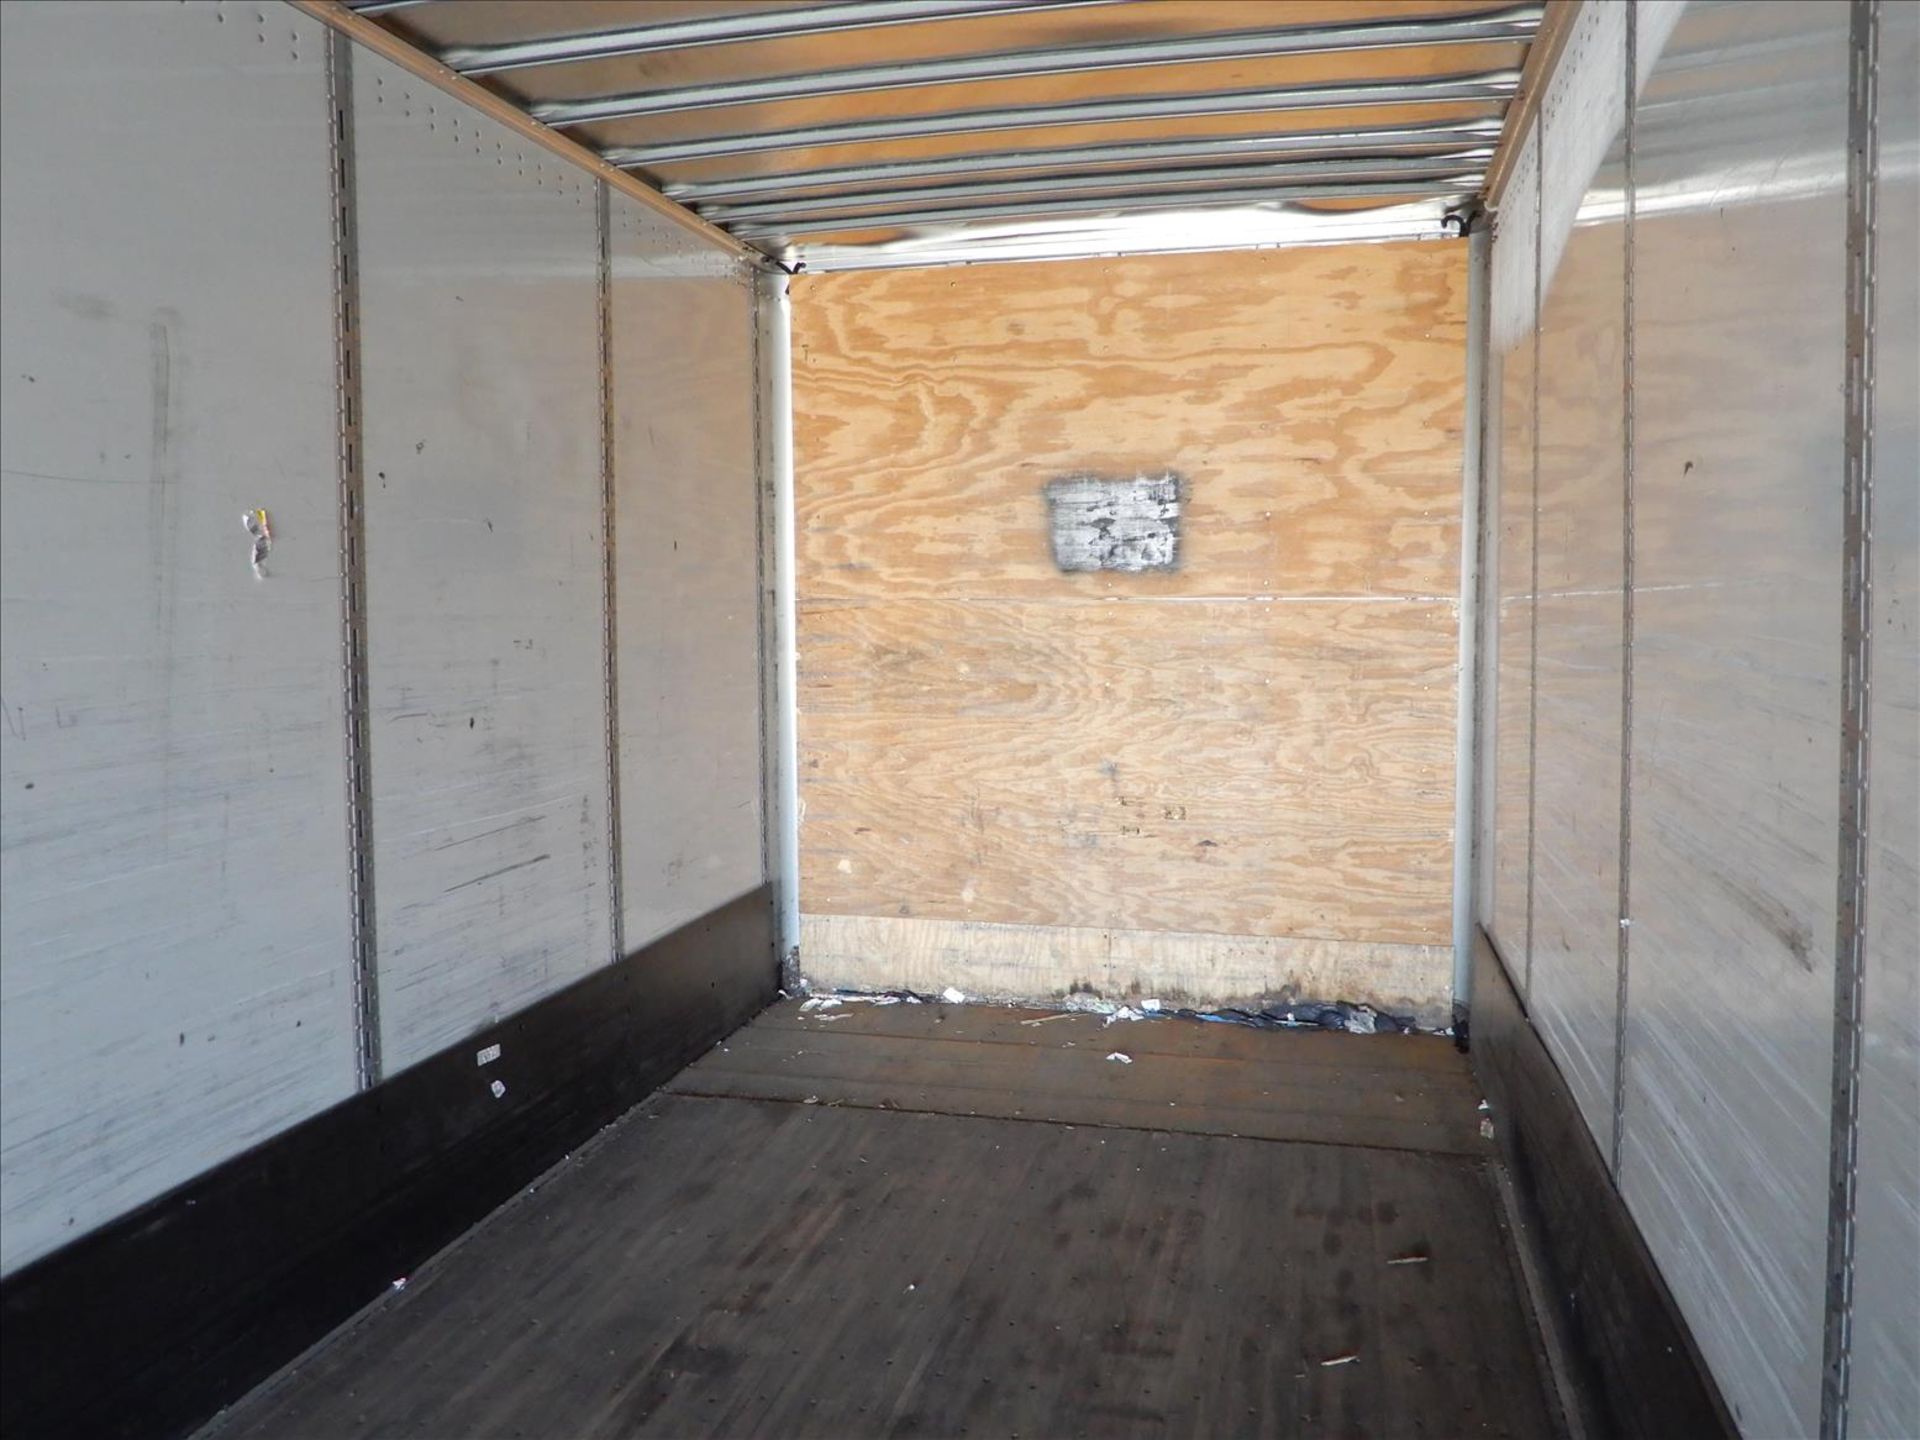 2012 Vanguard Trailer - Located in Indianapolis, IN - Image 26 of 29